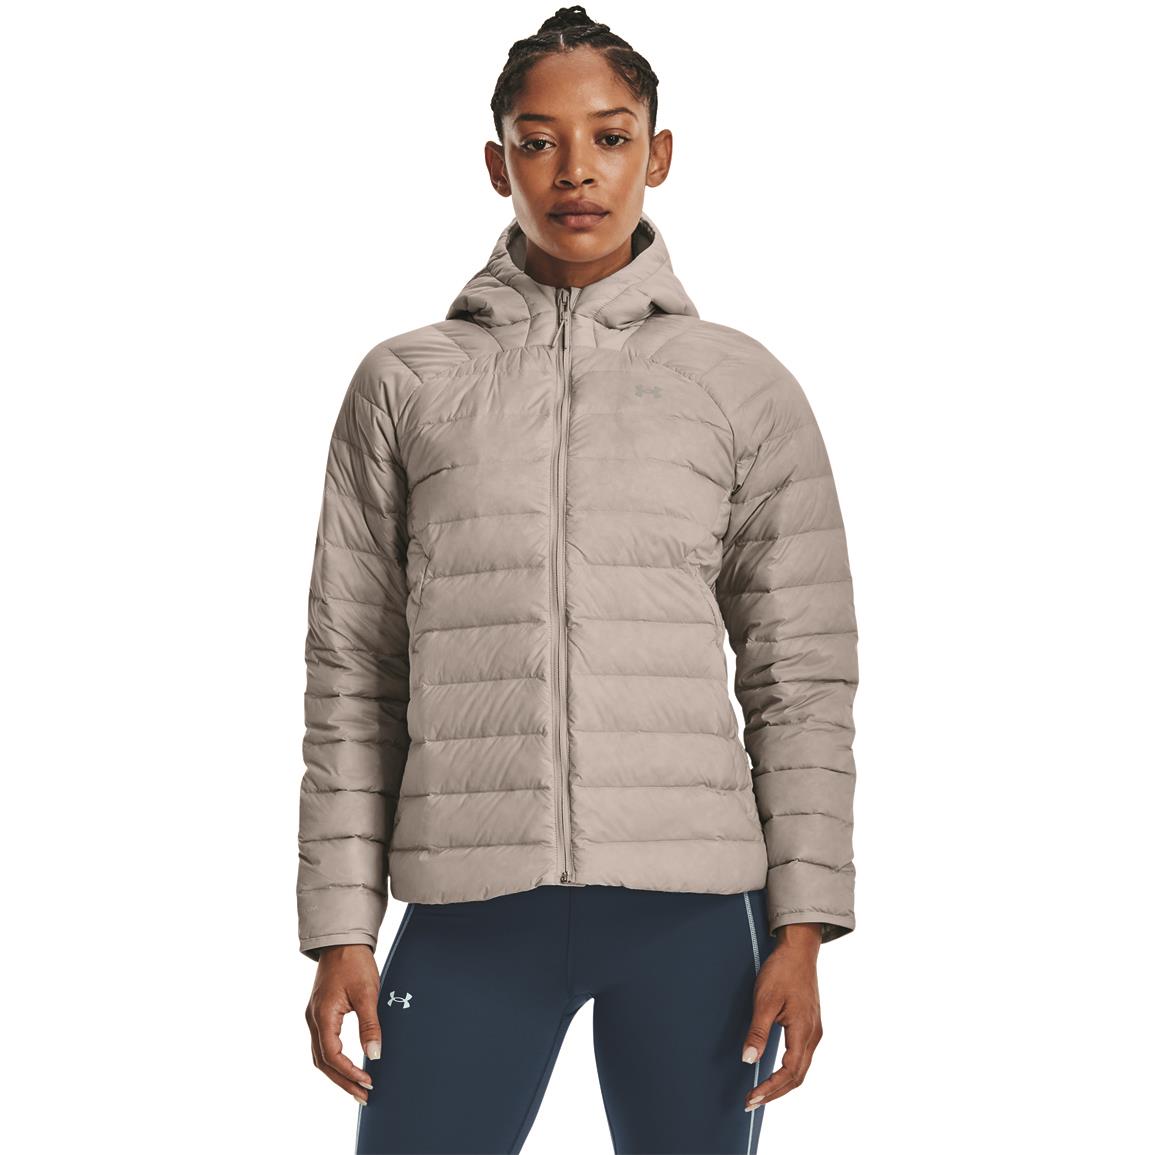 Under Armour Women's Storm Armour Down 2.0 Jacket, Ghost Gray